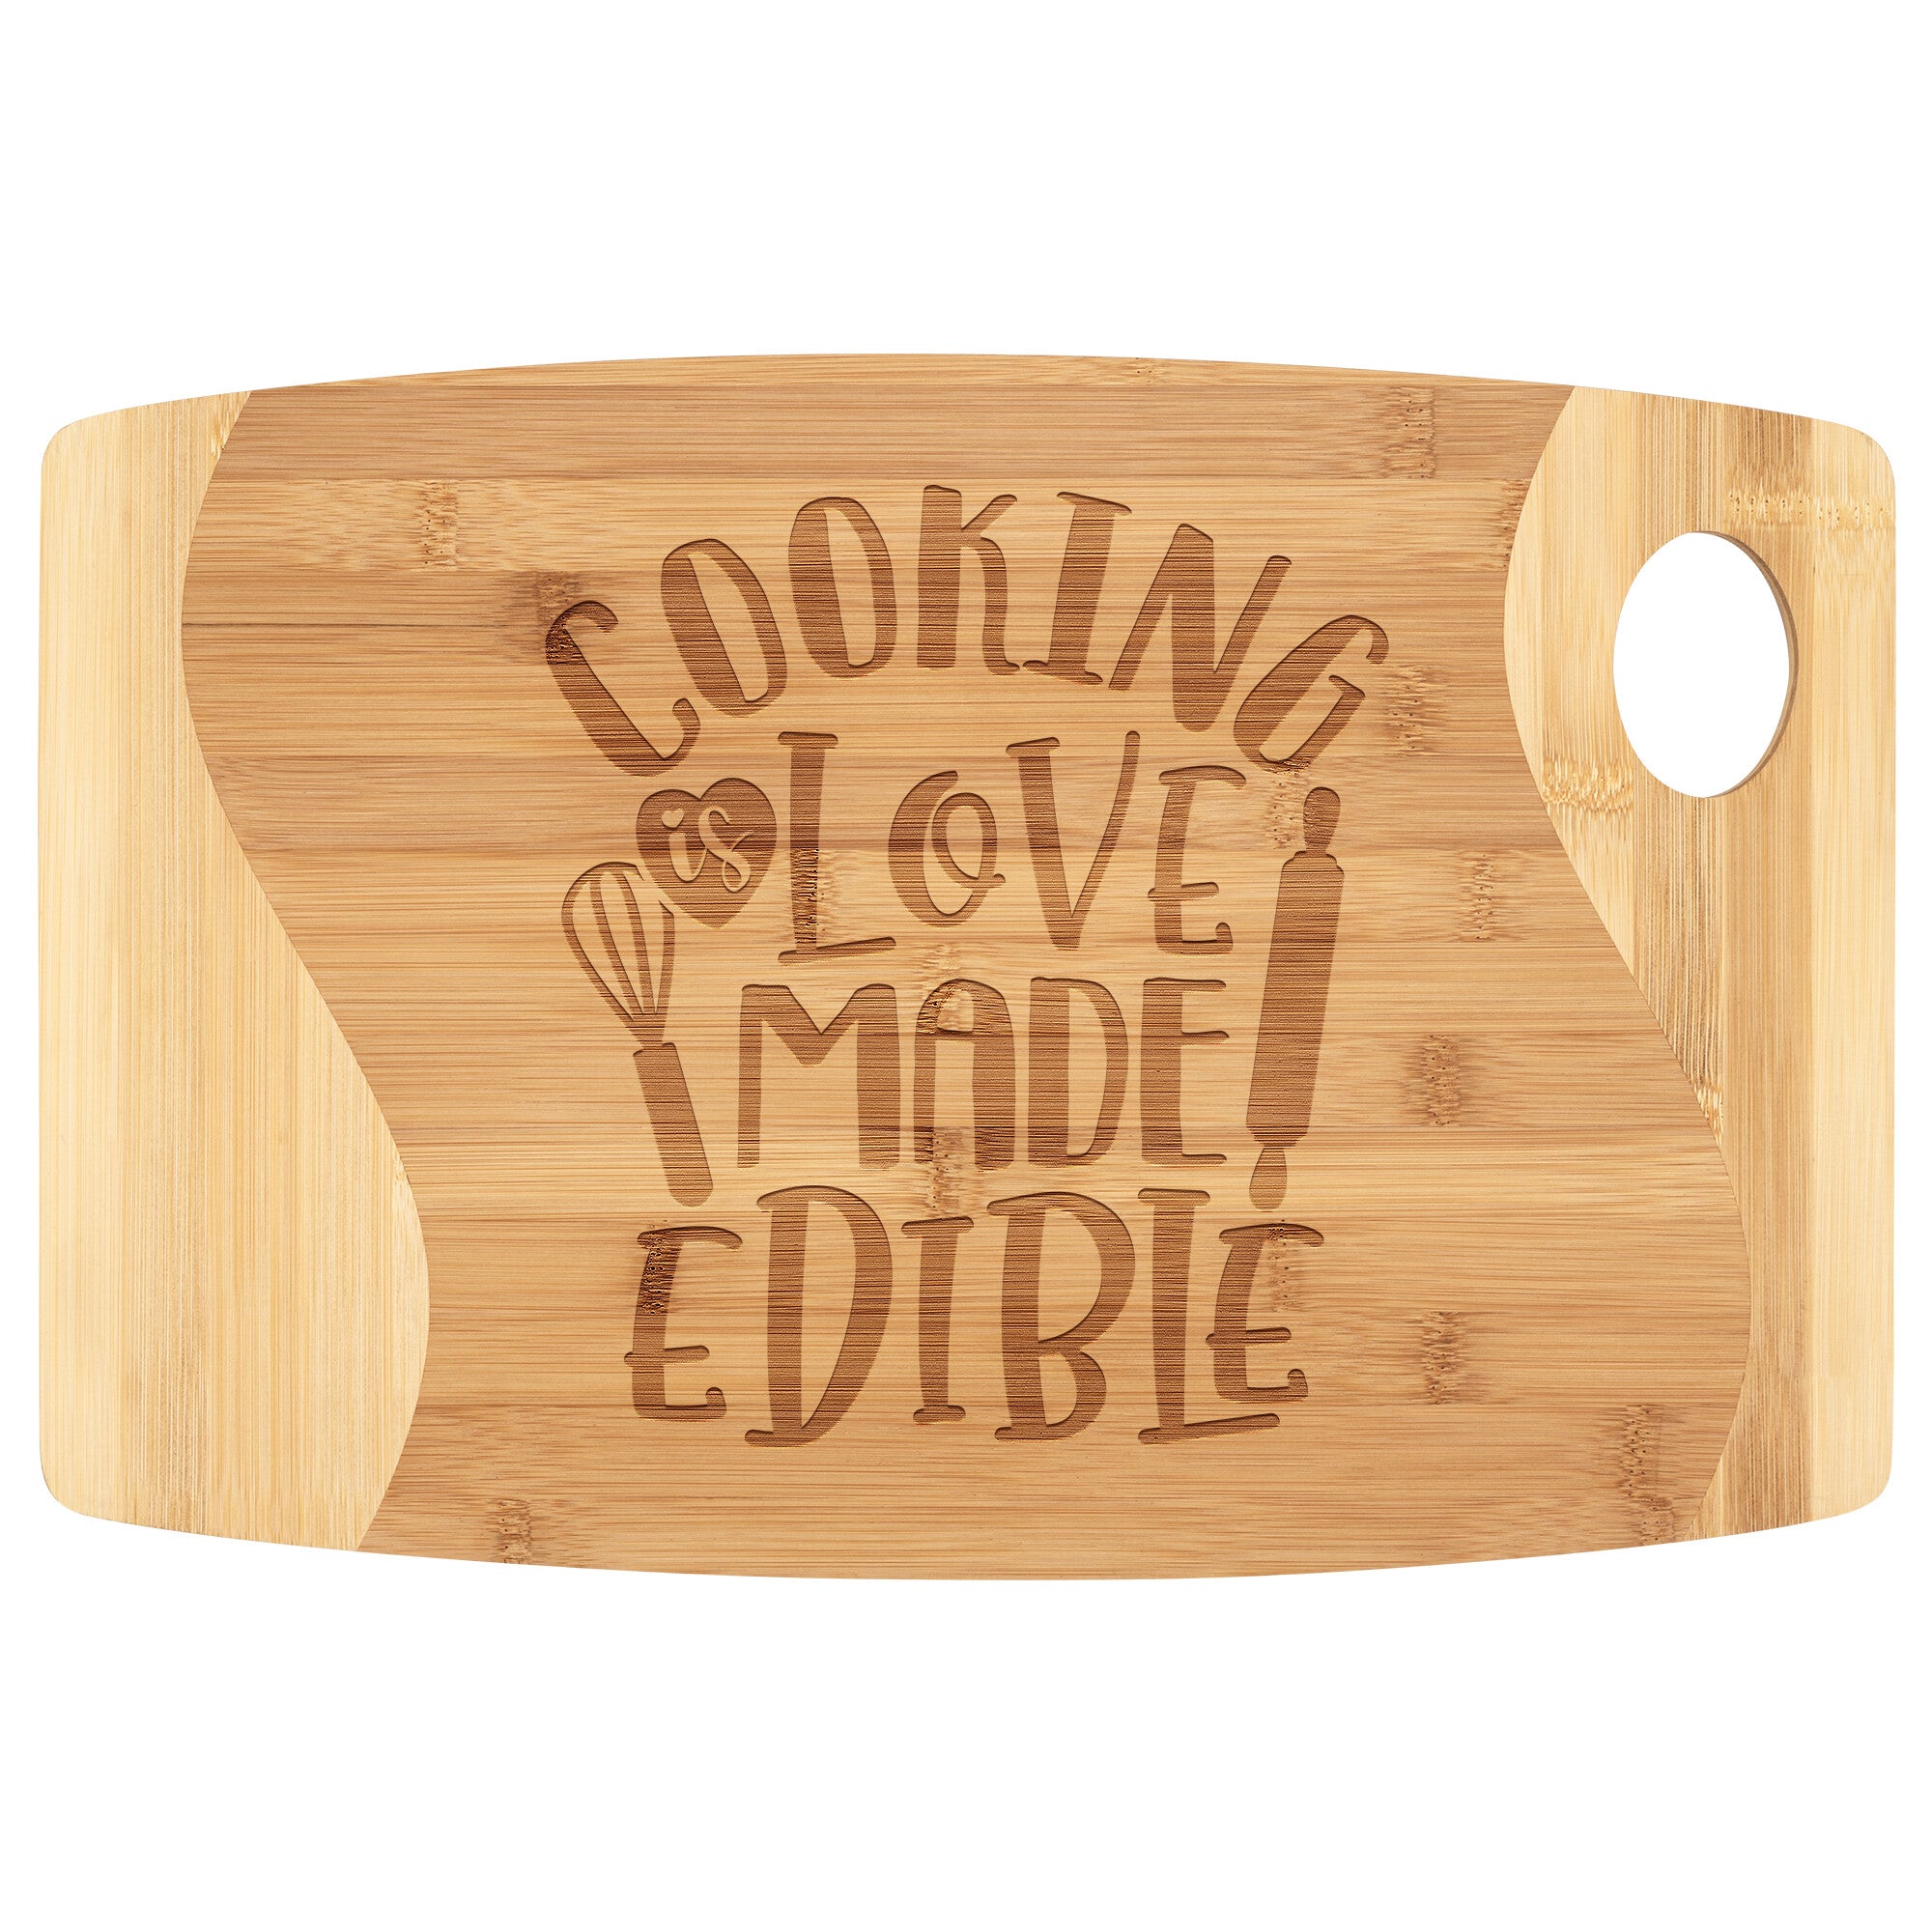 Cooking is Edible Love - My Kitchen Adorned